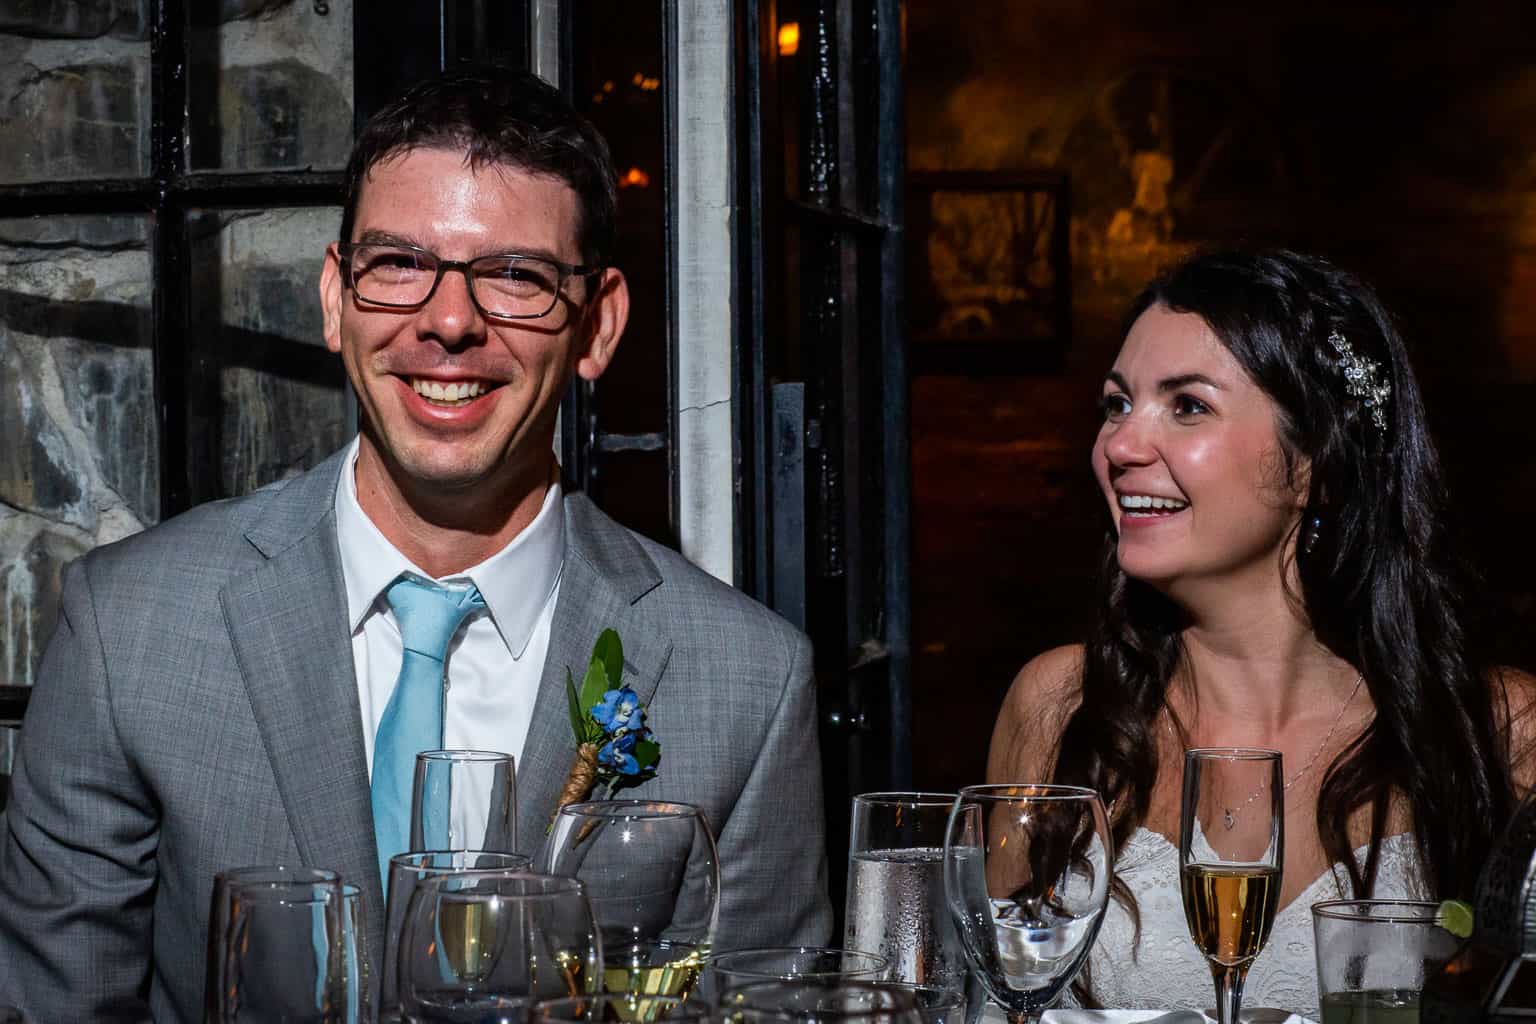 Scott and Taylor Woodworth at a table full of wine glasses at their wedding dinner. 